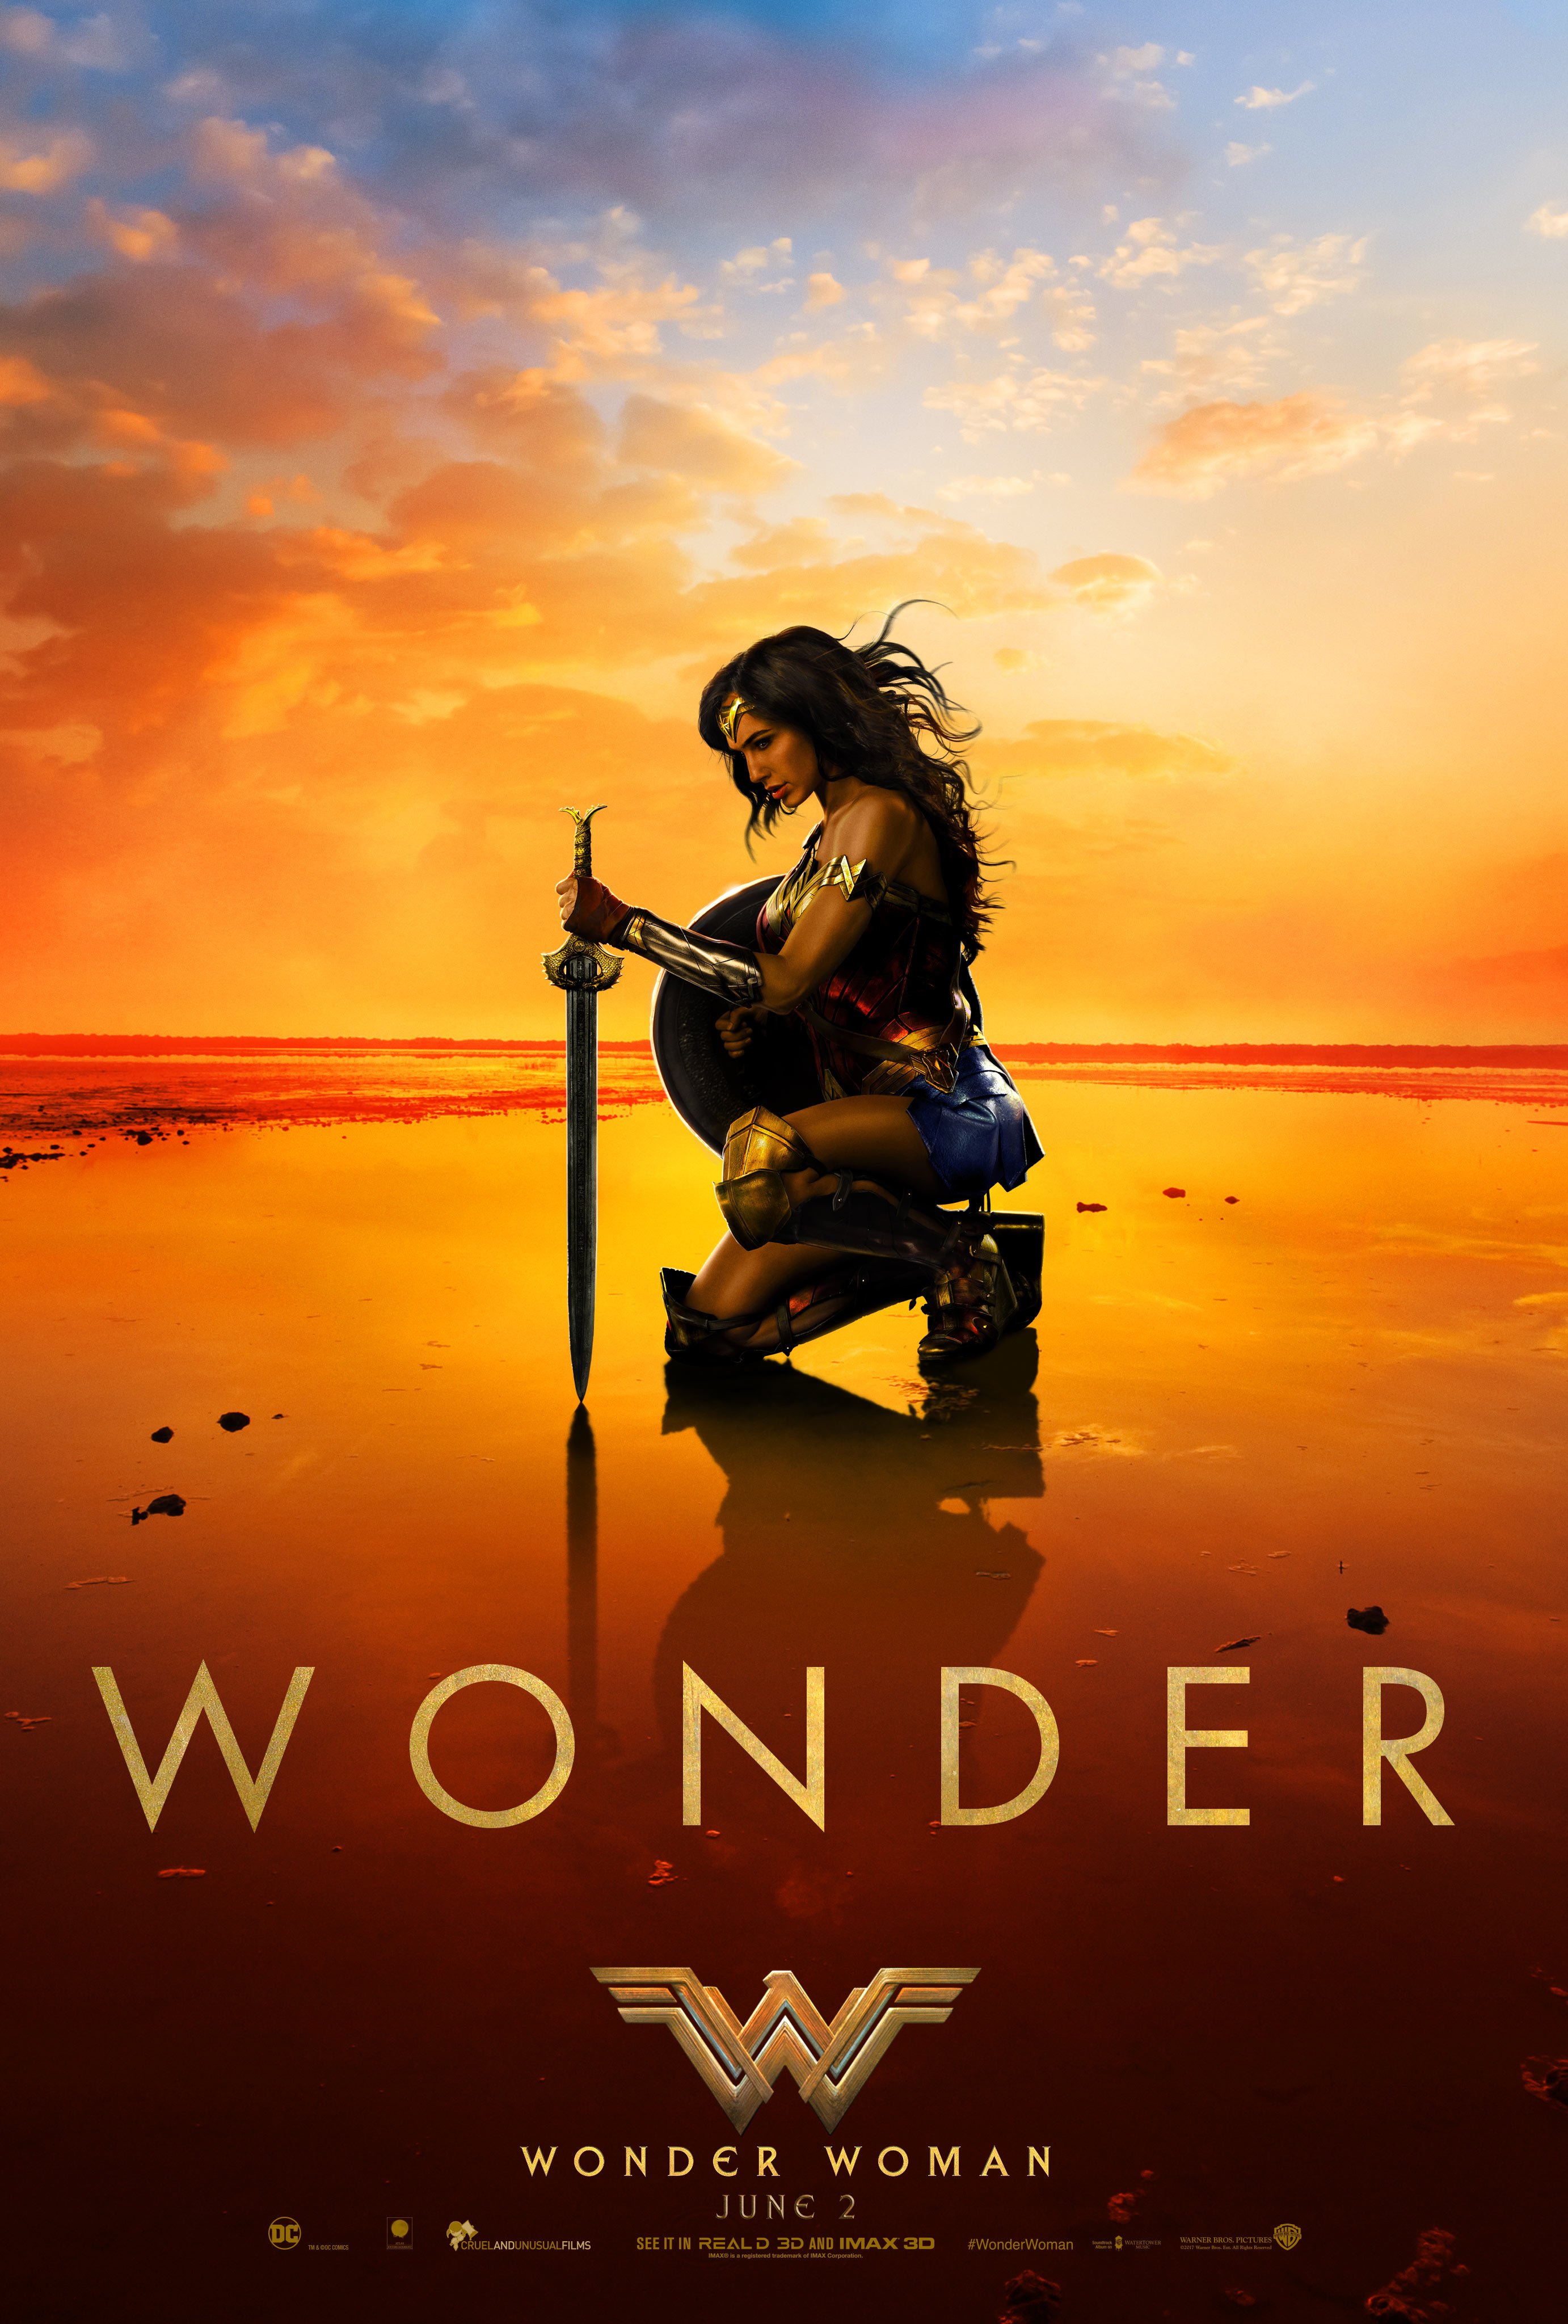 Wonder Woman” reviews: See what the critics are saying